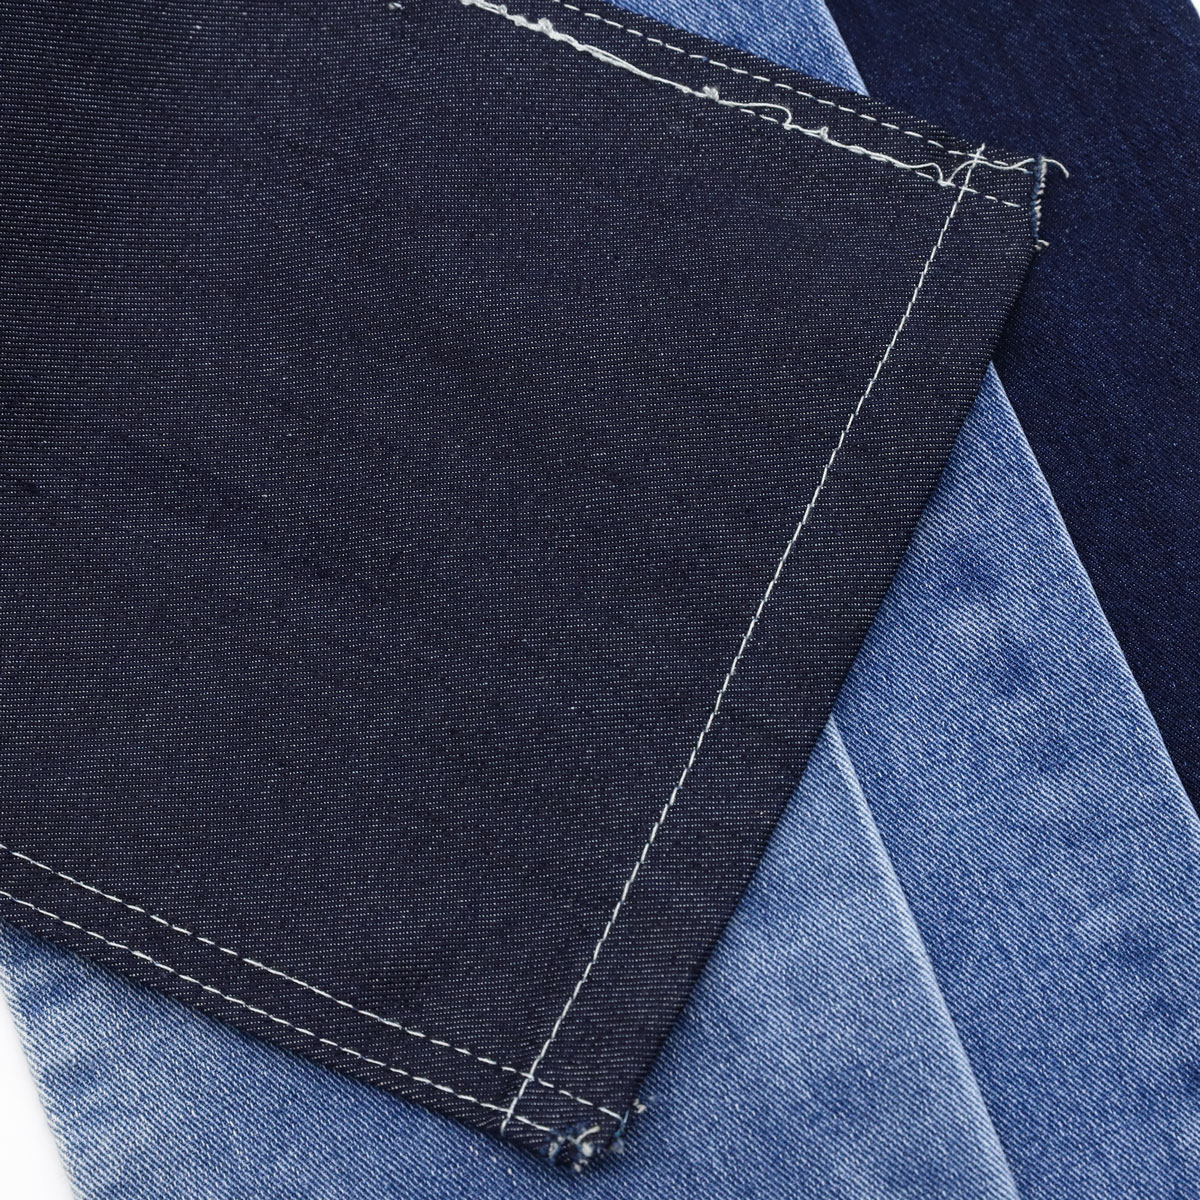 A Complete Guide to the Different Kinds of Stretch Denim Fabric 2